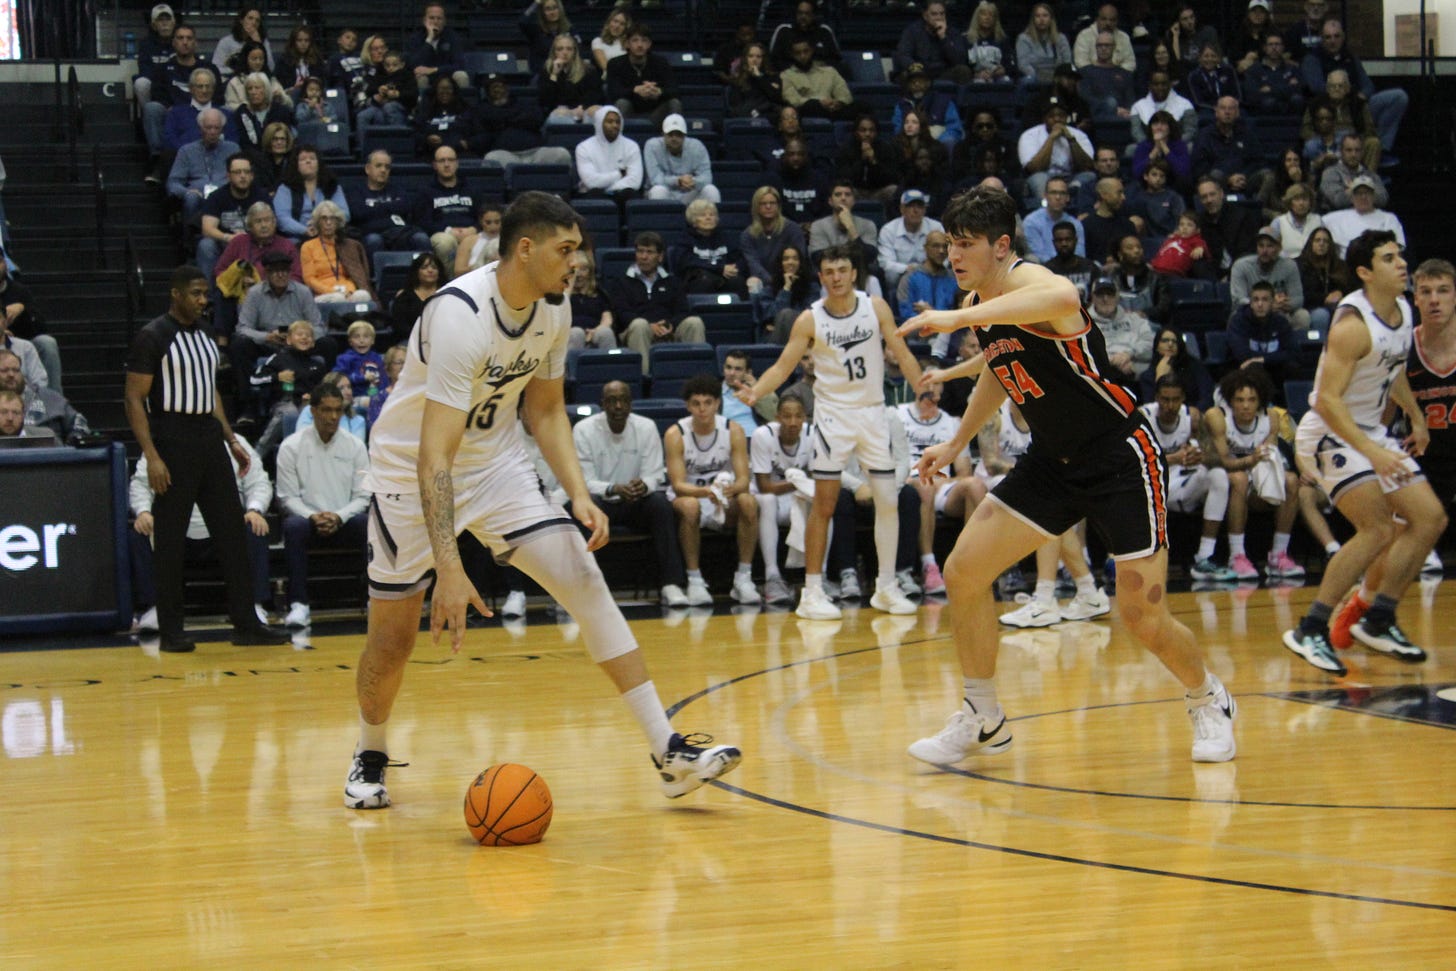 Monmouth’s Amaan Sandhu dribbles at the top of the key with Princeton’s Zach Martini defending on Nov. 18, 2023. (Photo by Adam Zielonka)